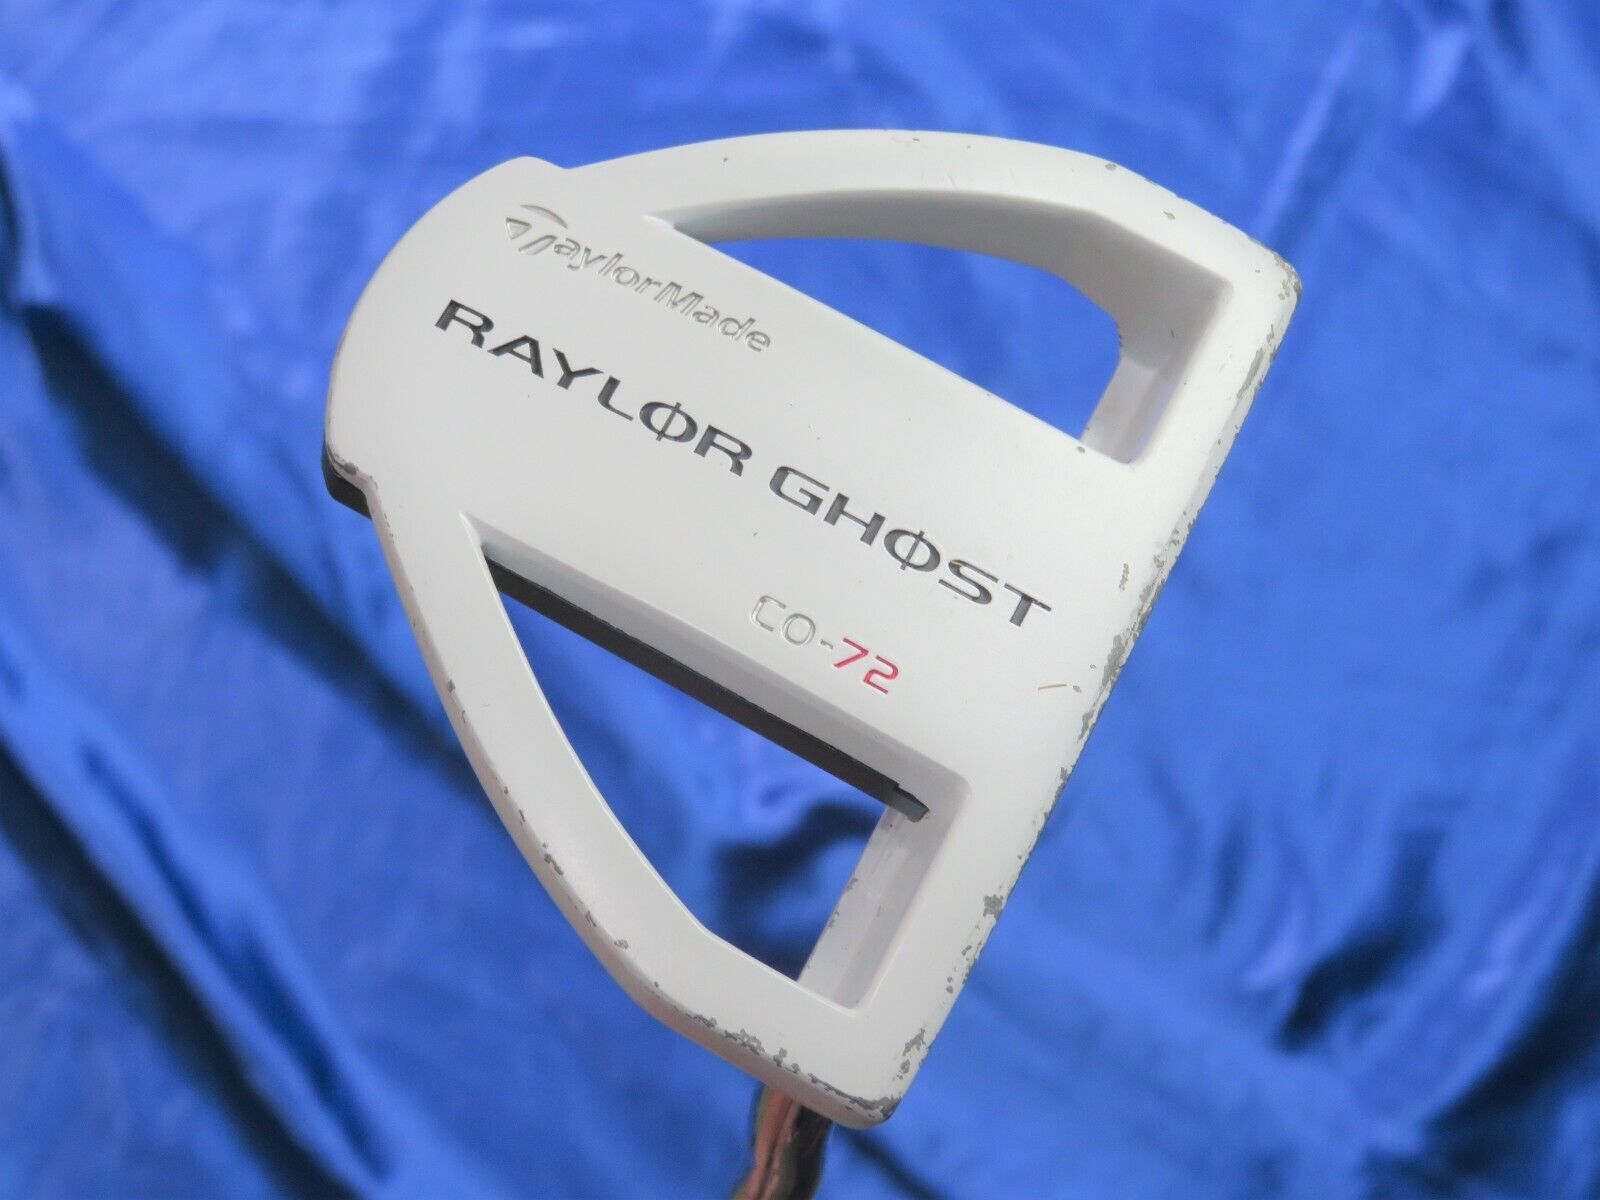 Taylor Made Raylor Ghost CO-72 Putter GOLF CLUB 34INCH TaylorMade INV 0